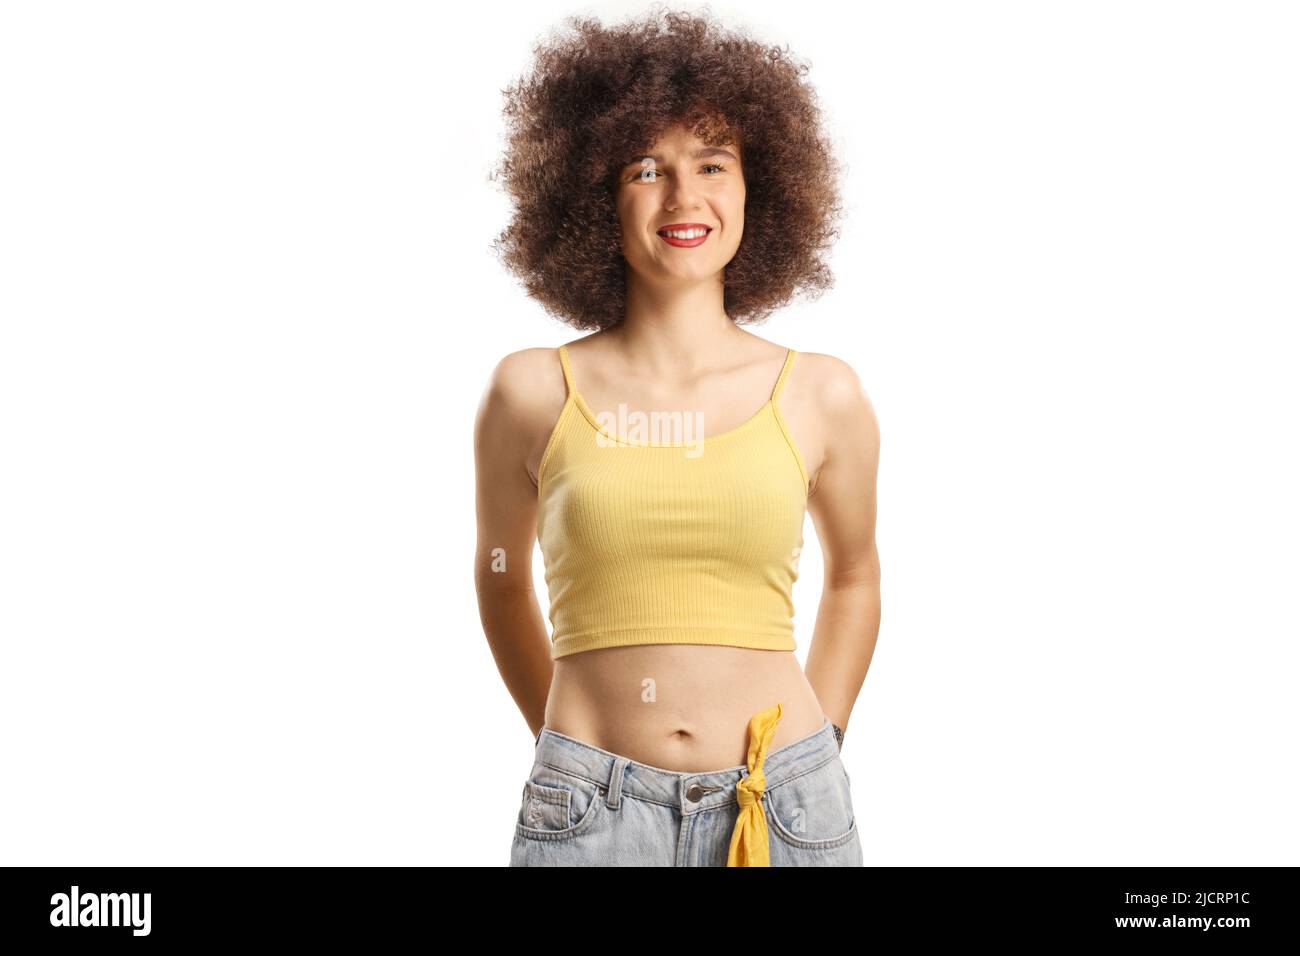 Smiling young caucasian woman with afro hairstyle isolated on white background Stock Photo